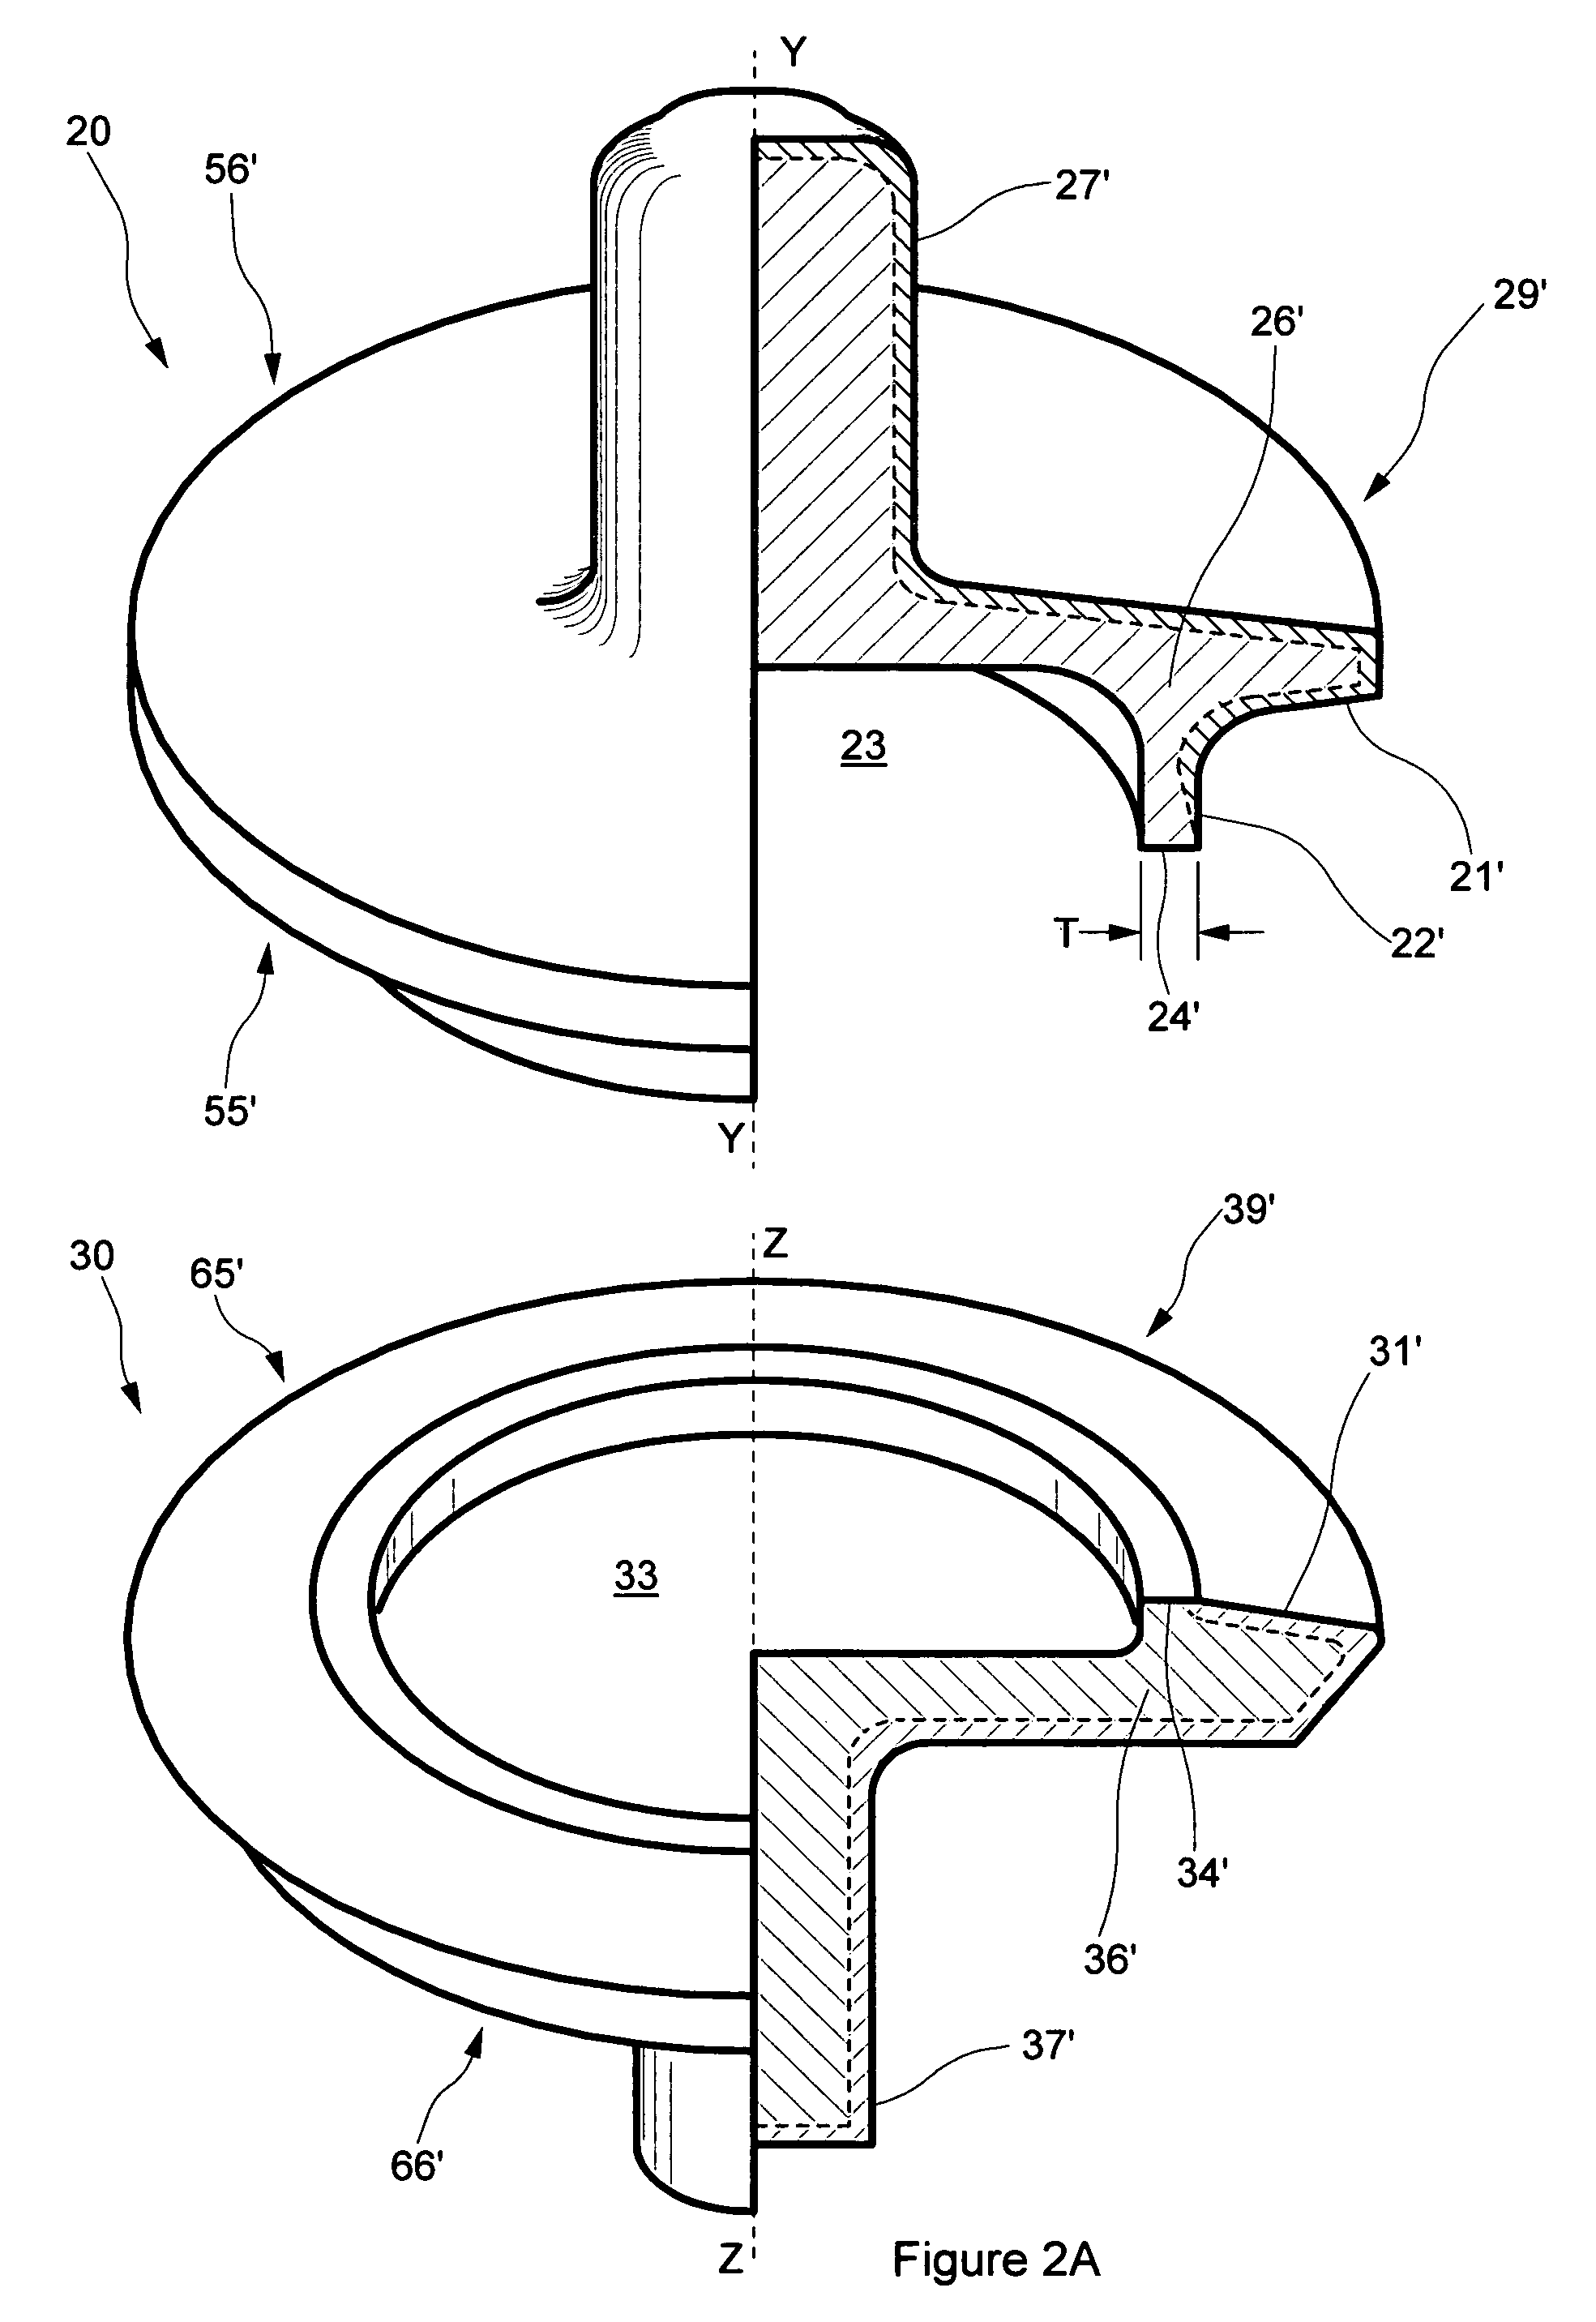 Valve body with integral seal retention groove